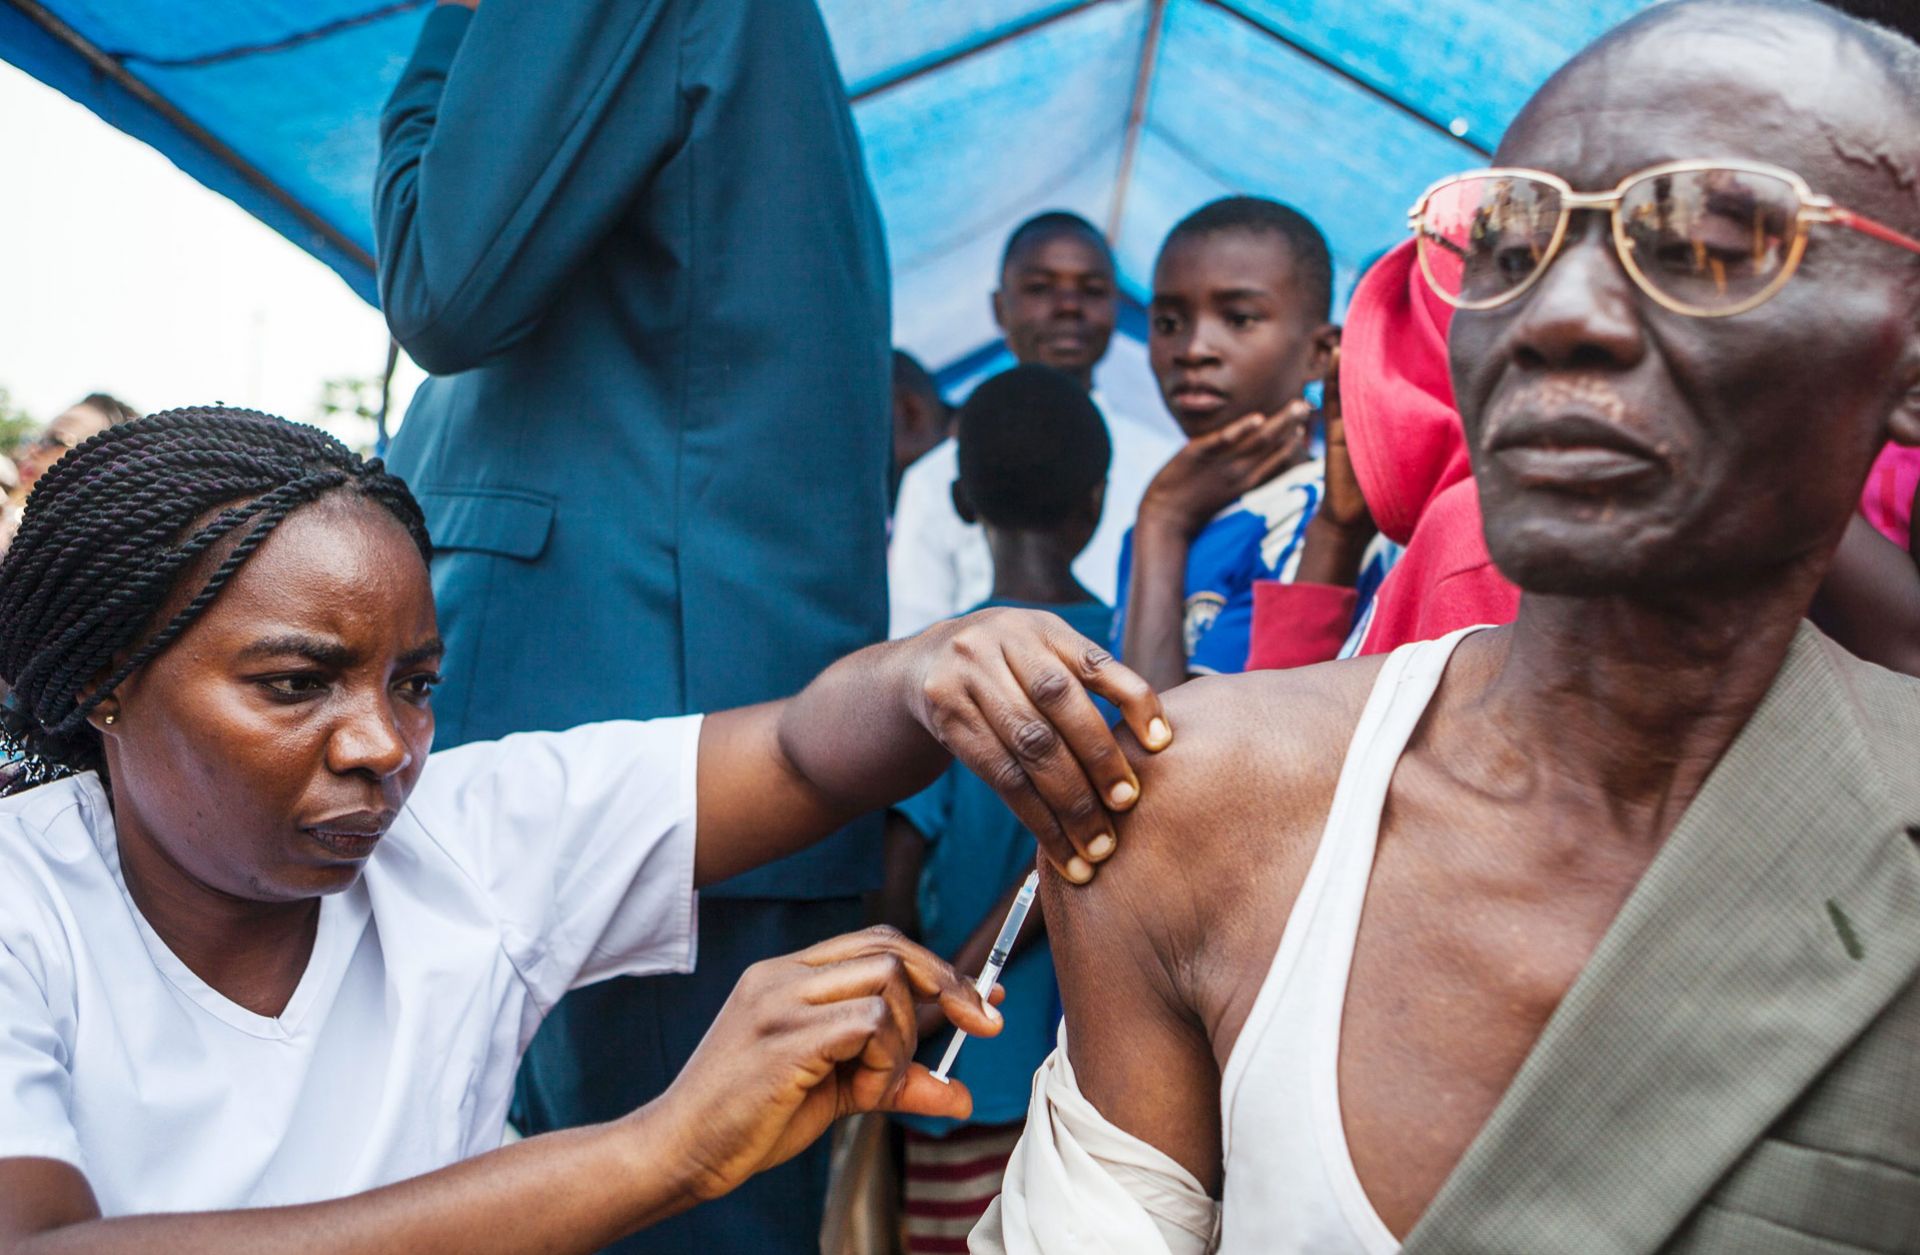 In Kinshasa, a man receives a vaccination against yellow fever, which has spread to the Democratic Republic of the Congo from Angola, where an outbreak began in late 2015. Though it has attracted far less attention than the Zika virus, an outbreak of yellow fever could turn into a global concern if it spreads along economic lines from Angola and the Democratic Republic of the Congo to China.